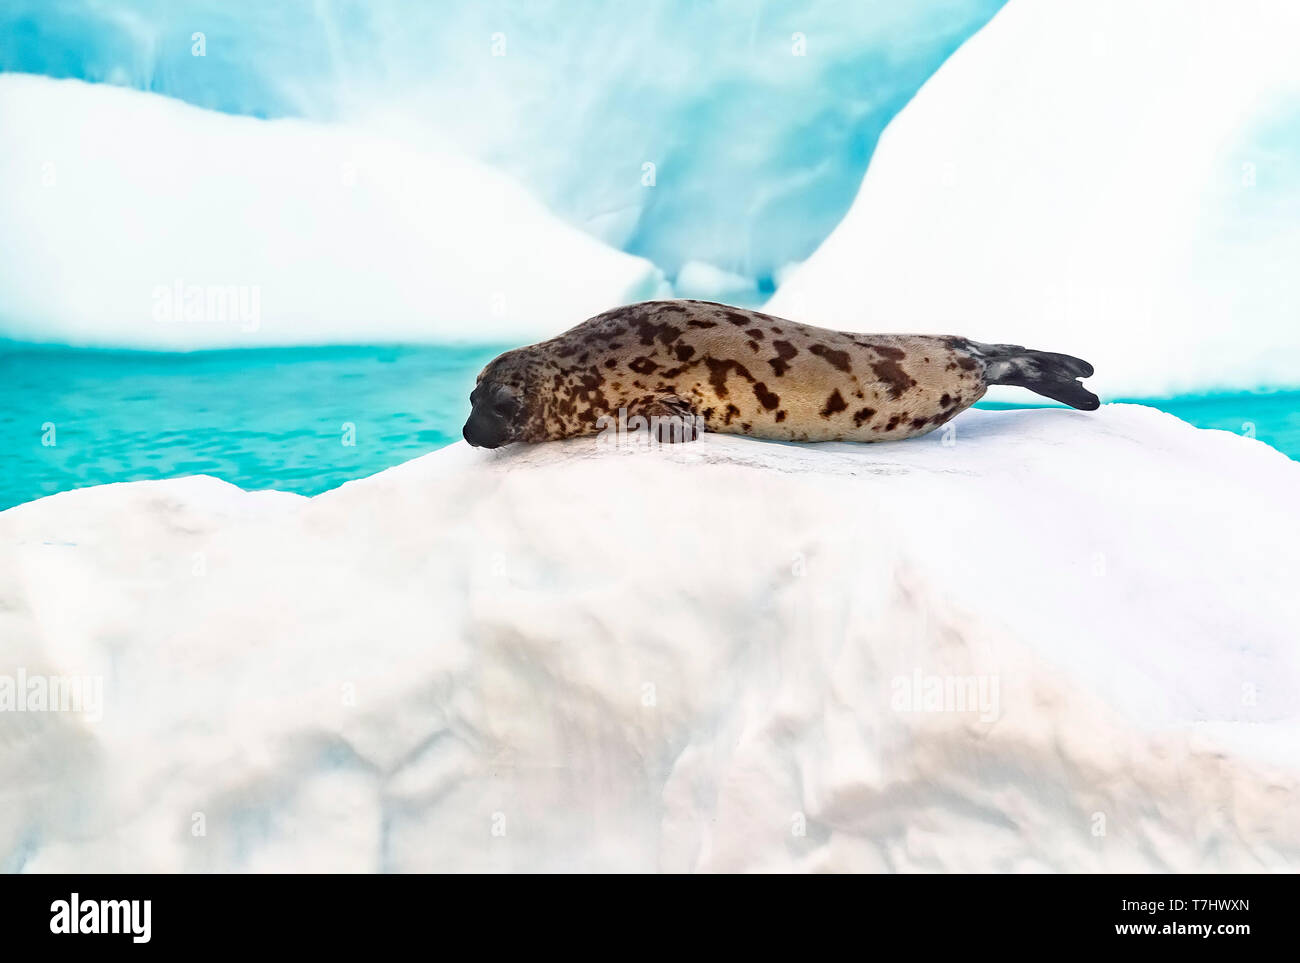 Female Hooded Seal lingered on a ice pack in middle of the Greenland Sea. July 2010. Stock Photo